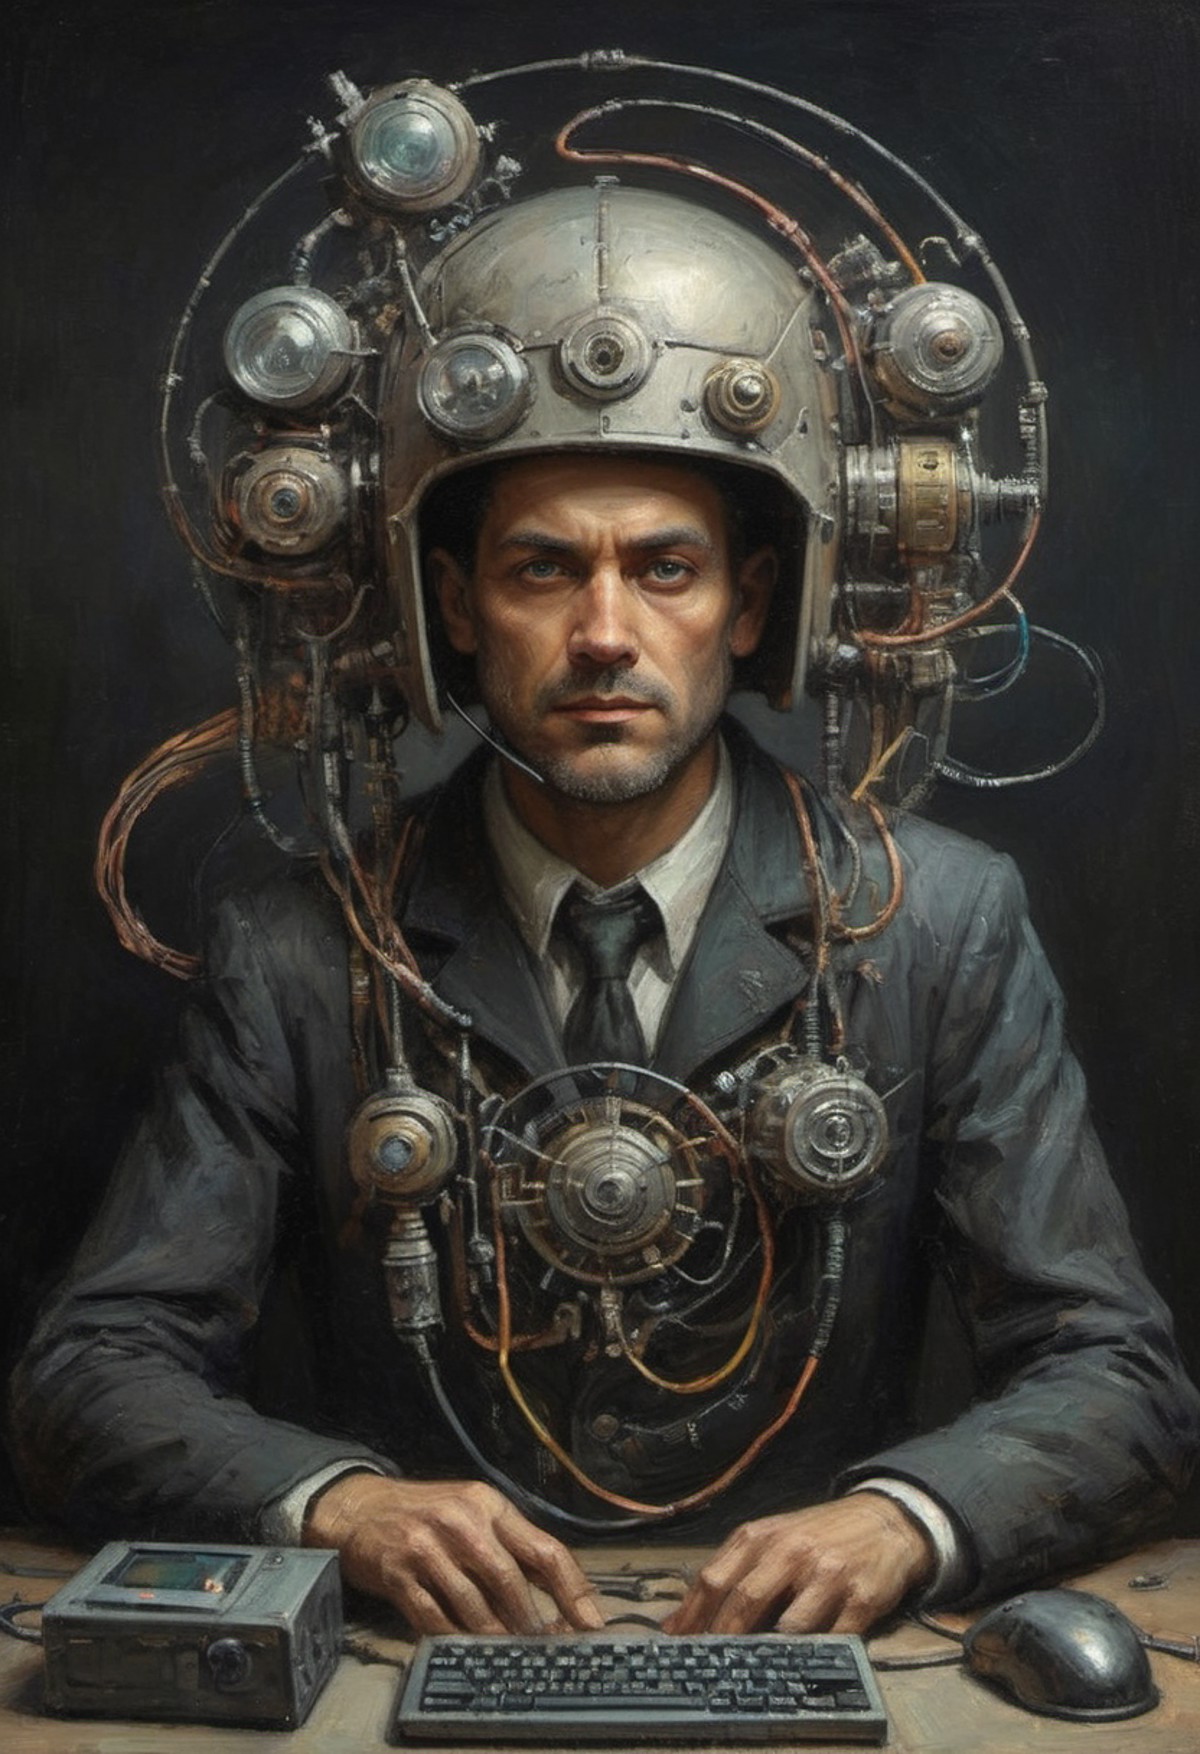 dark cybersteampunk man who interfaces with a retro-futuristic rube-goldberg manifestation of the internet with cables fro...